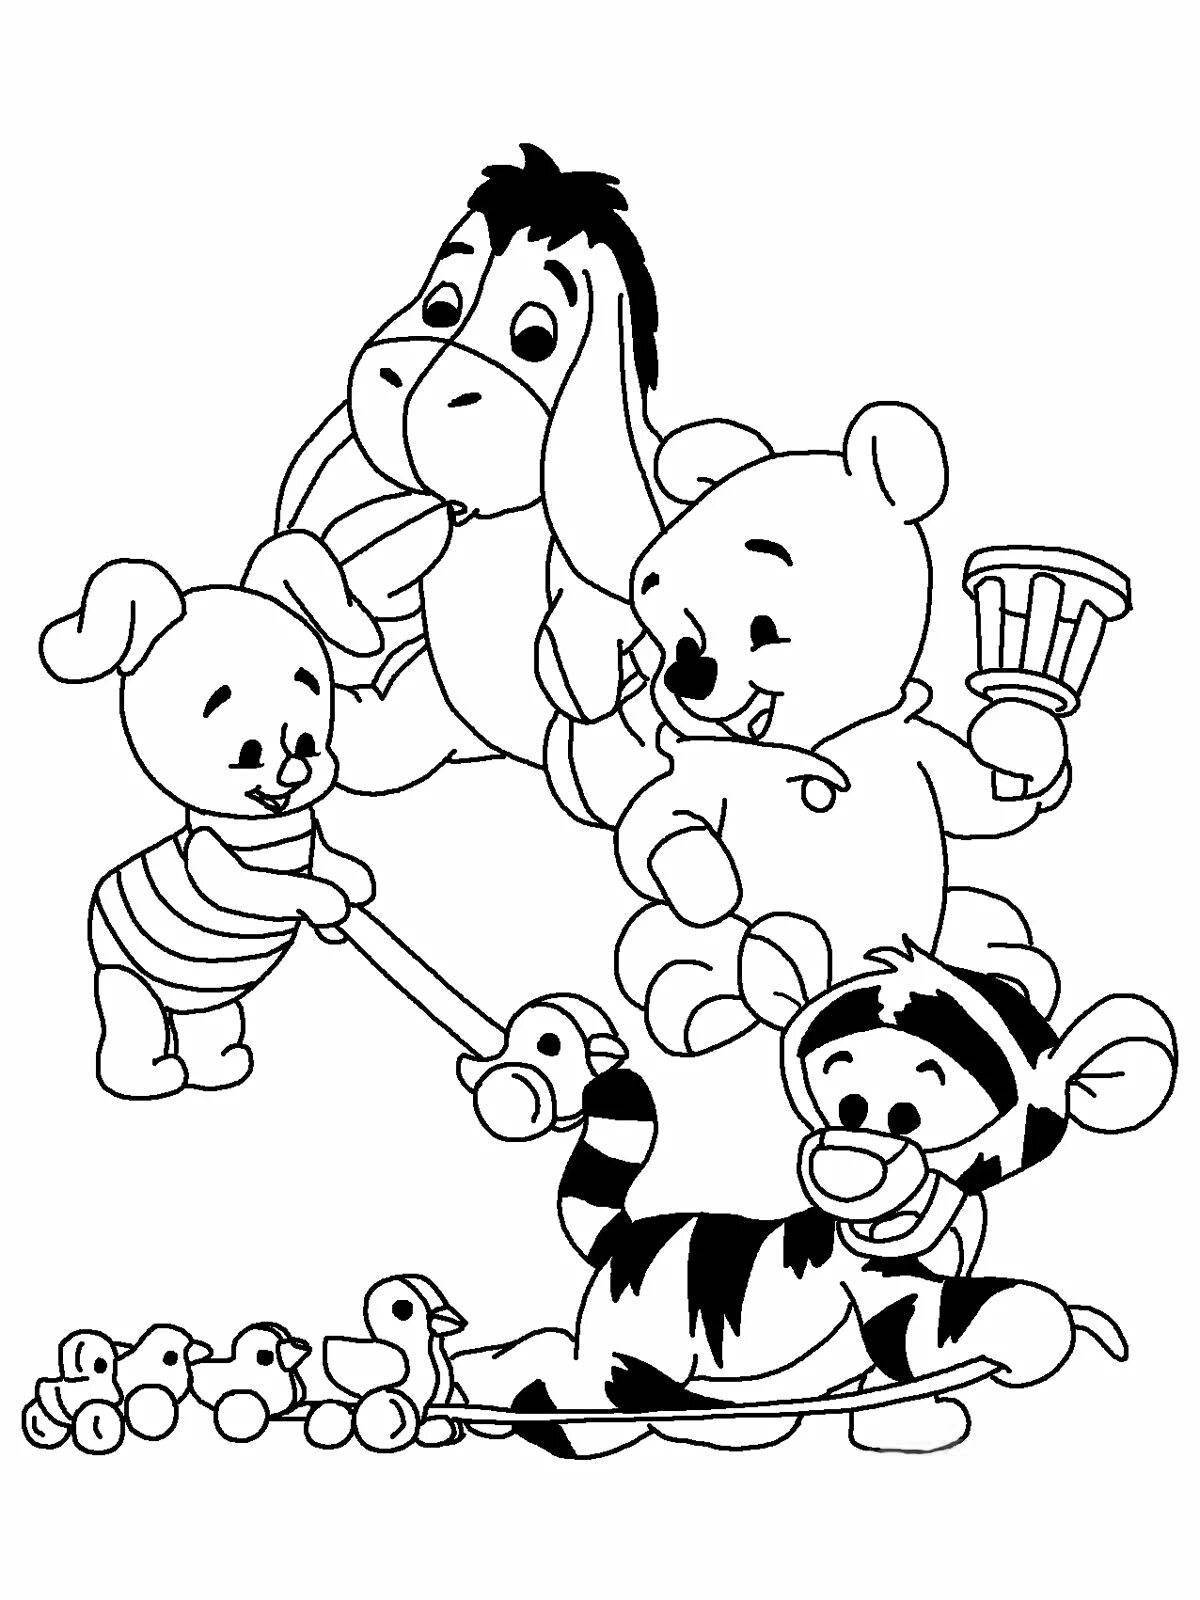 Cute winnie the pooh coloring book for kids